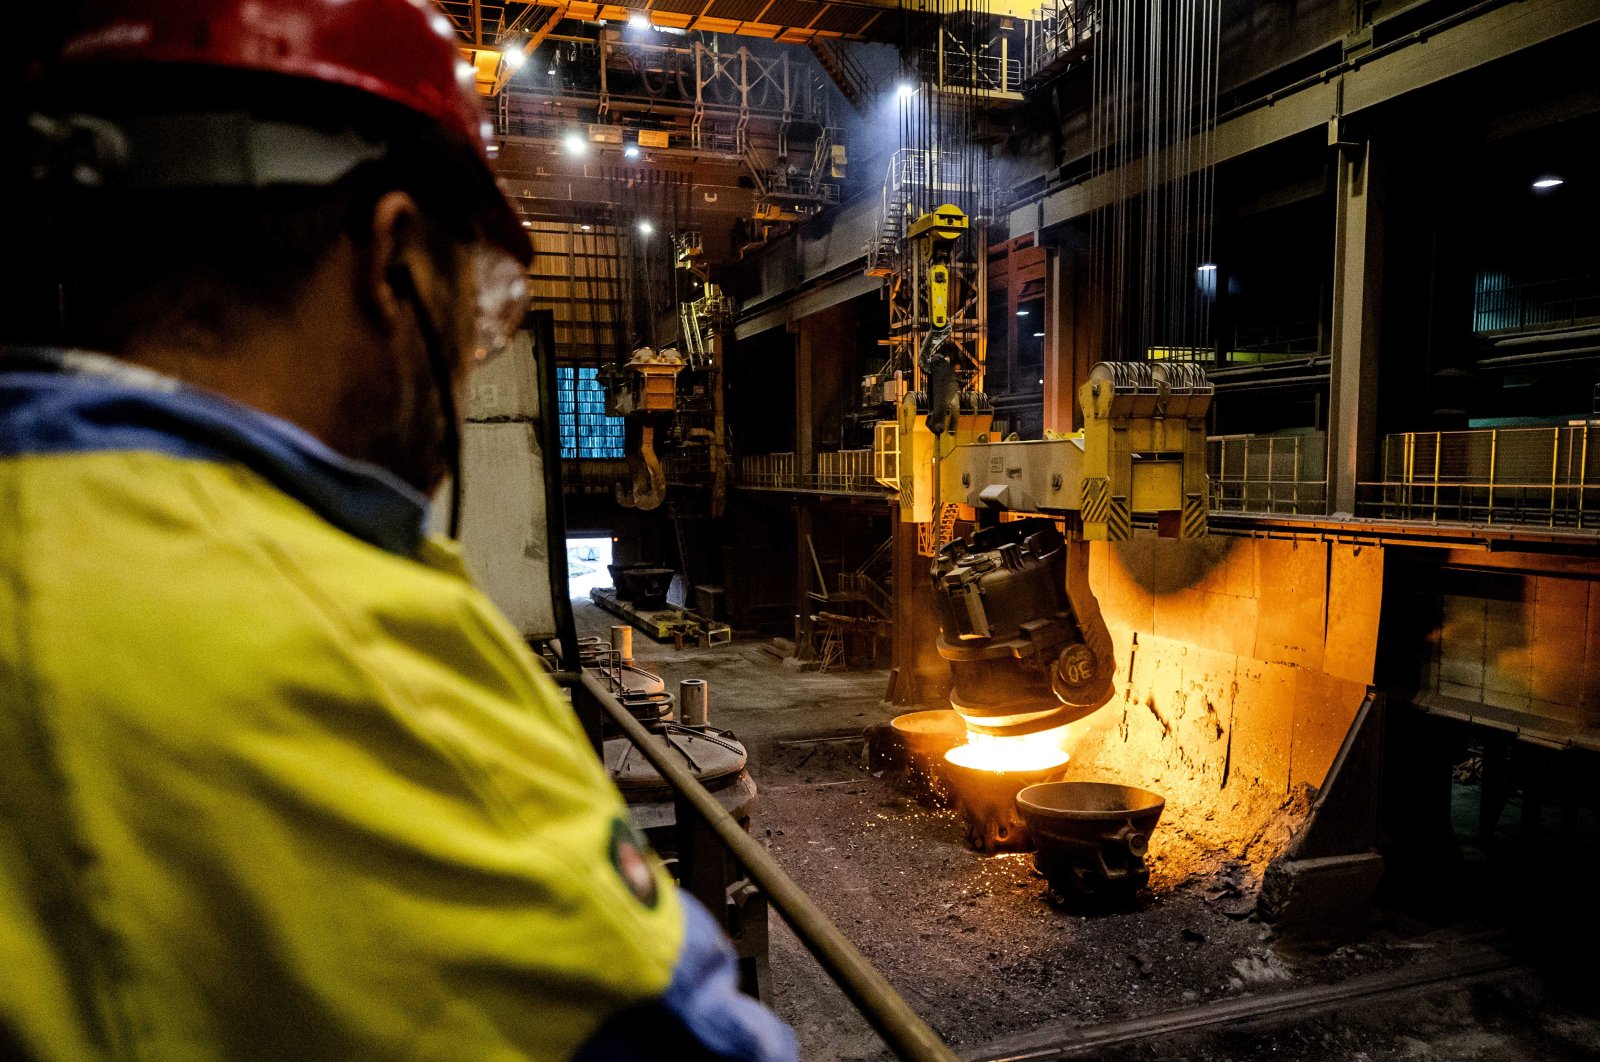 A picture made available on Oct. 21, 2021, shows residual slag being cast off in the Tata Steel factory in Ijmuiden, the Netherlands. (EPA Photo)